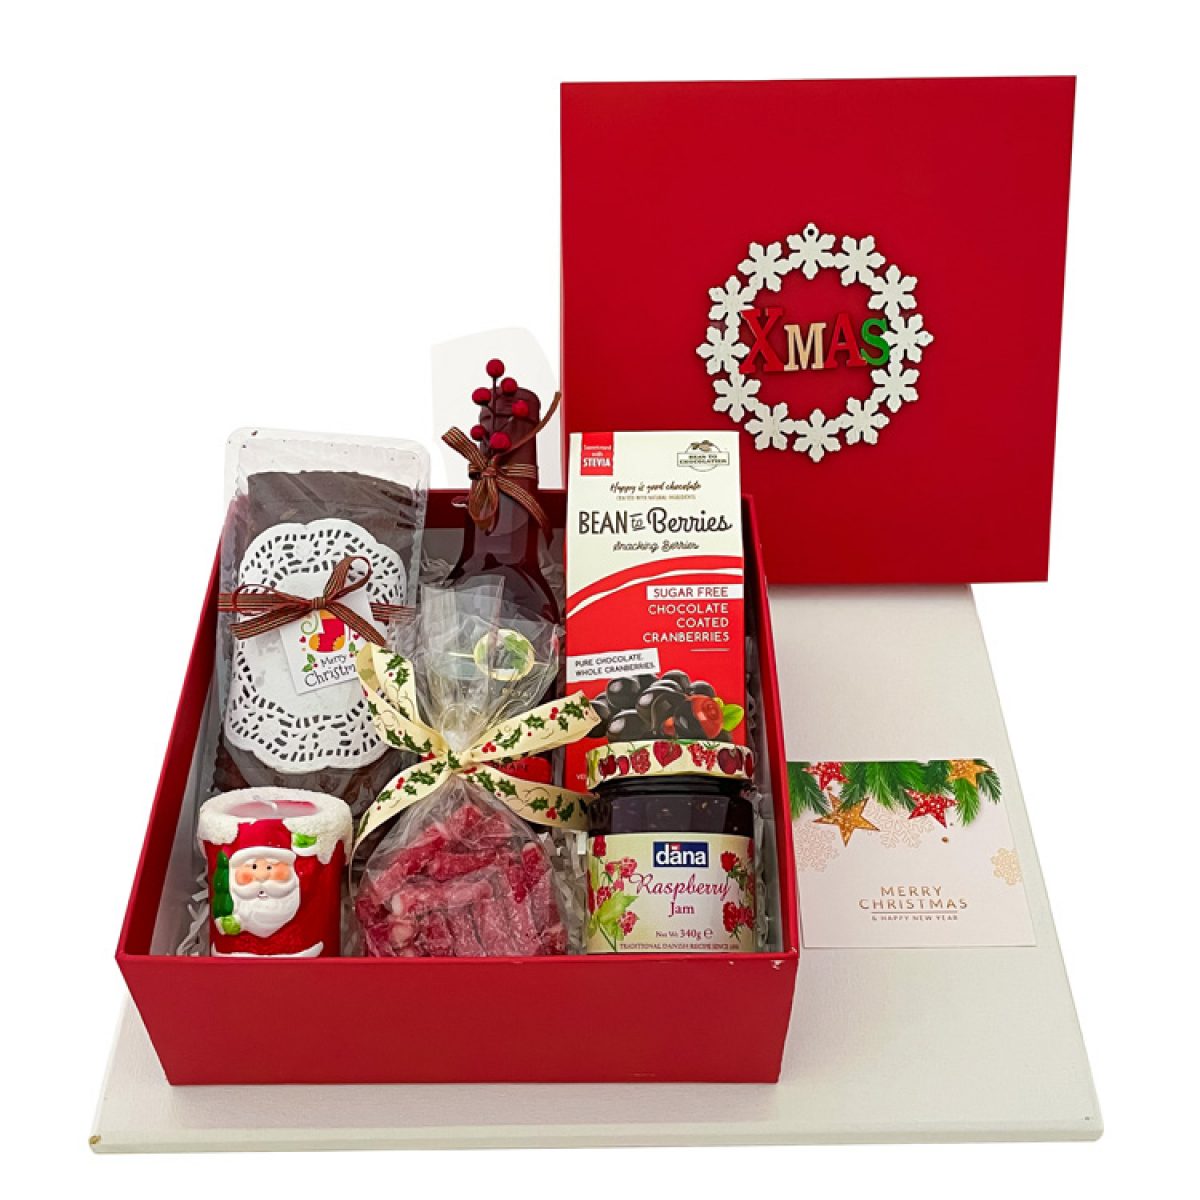 Send Chocolate Gifts, Gift Baskets & Hampers to Indonesia Online